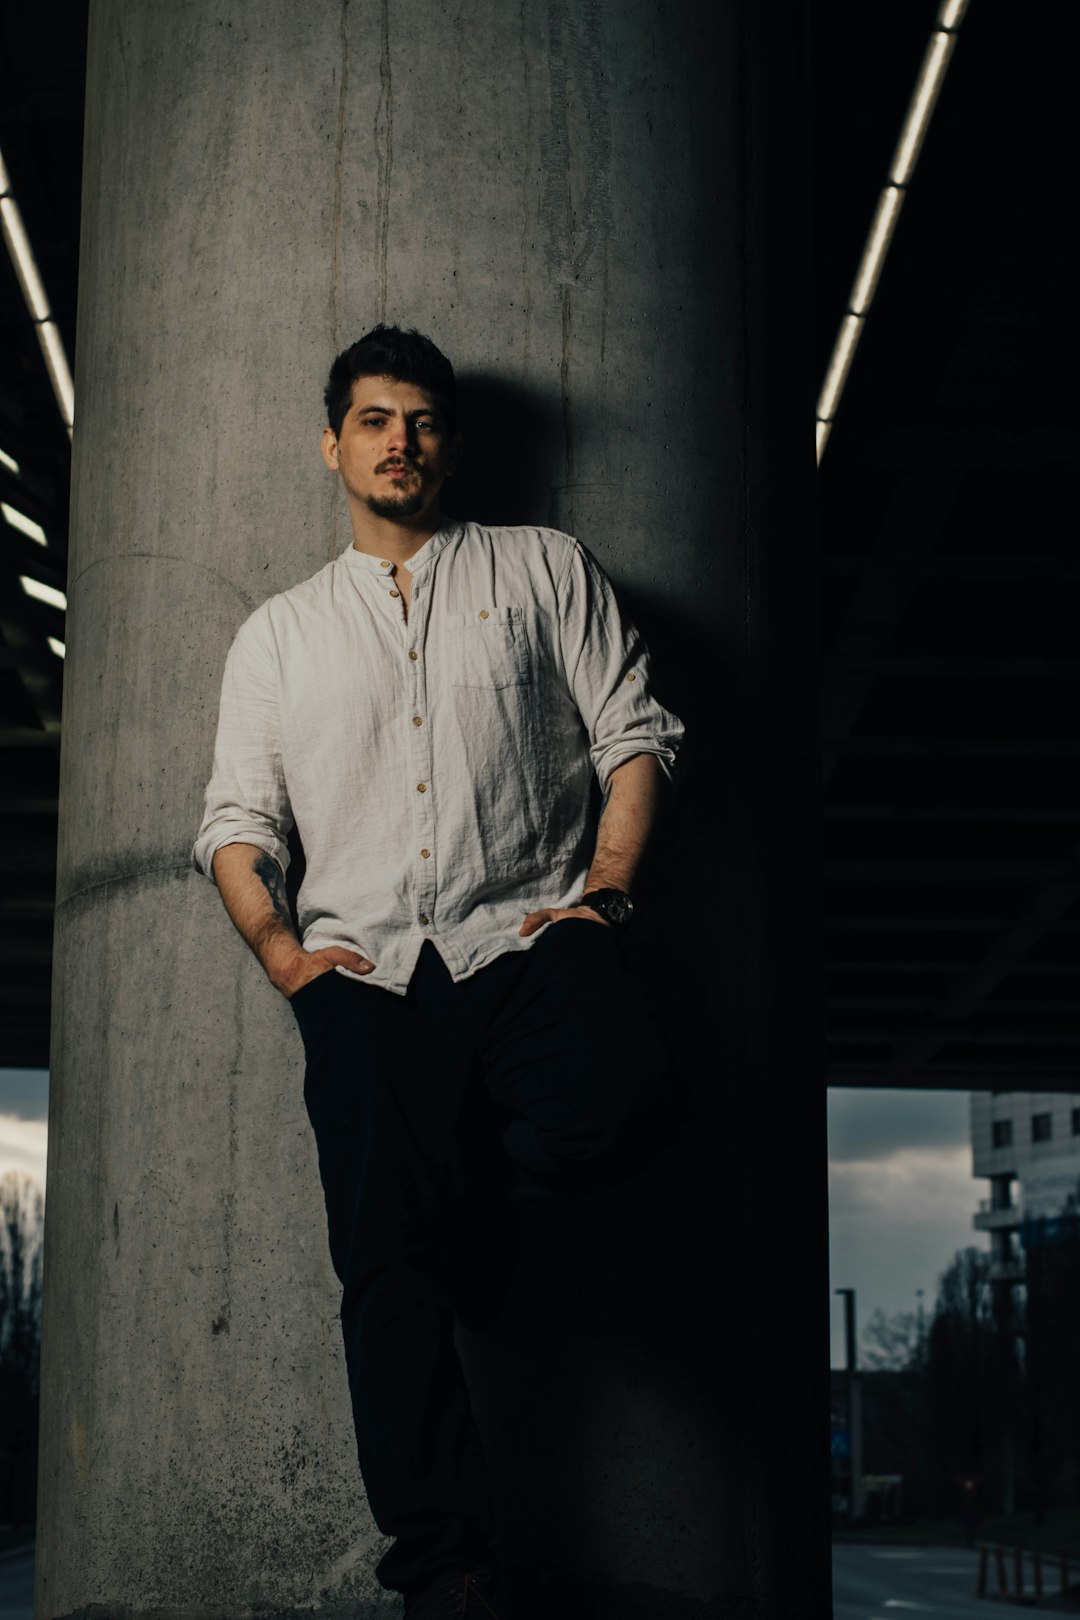 man in white button up shirt and black pants standing beside gray concrete wall during daytime